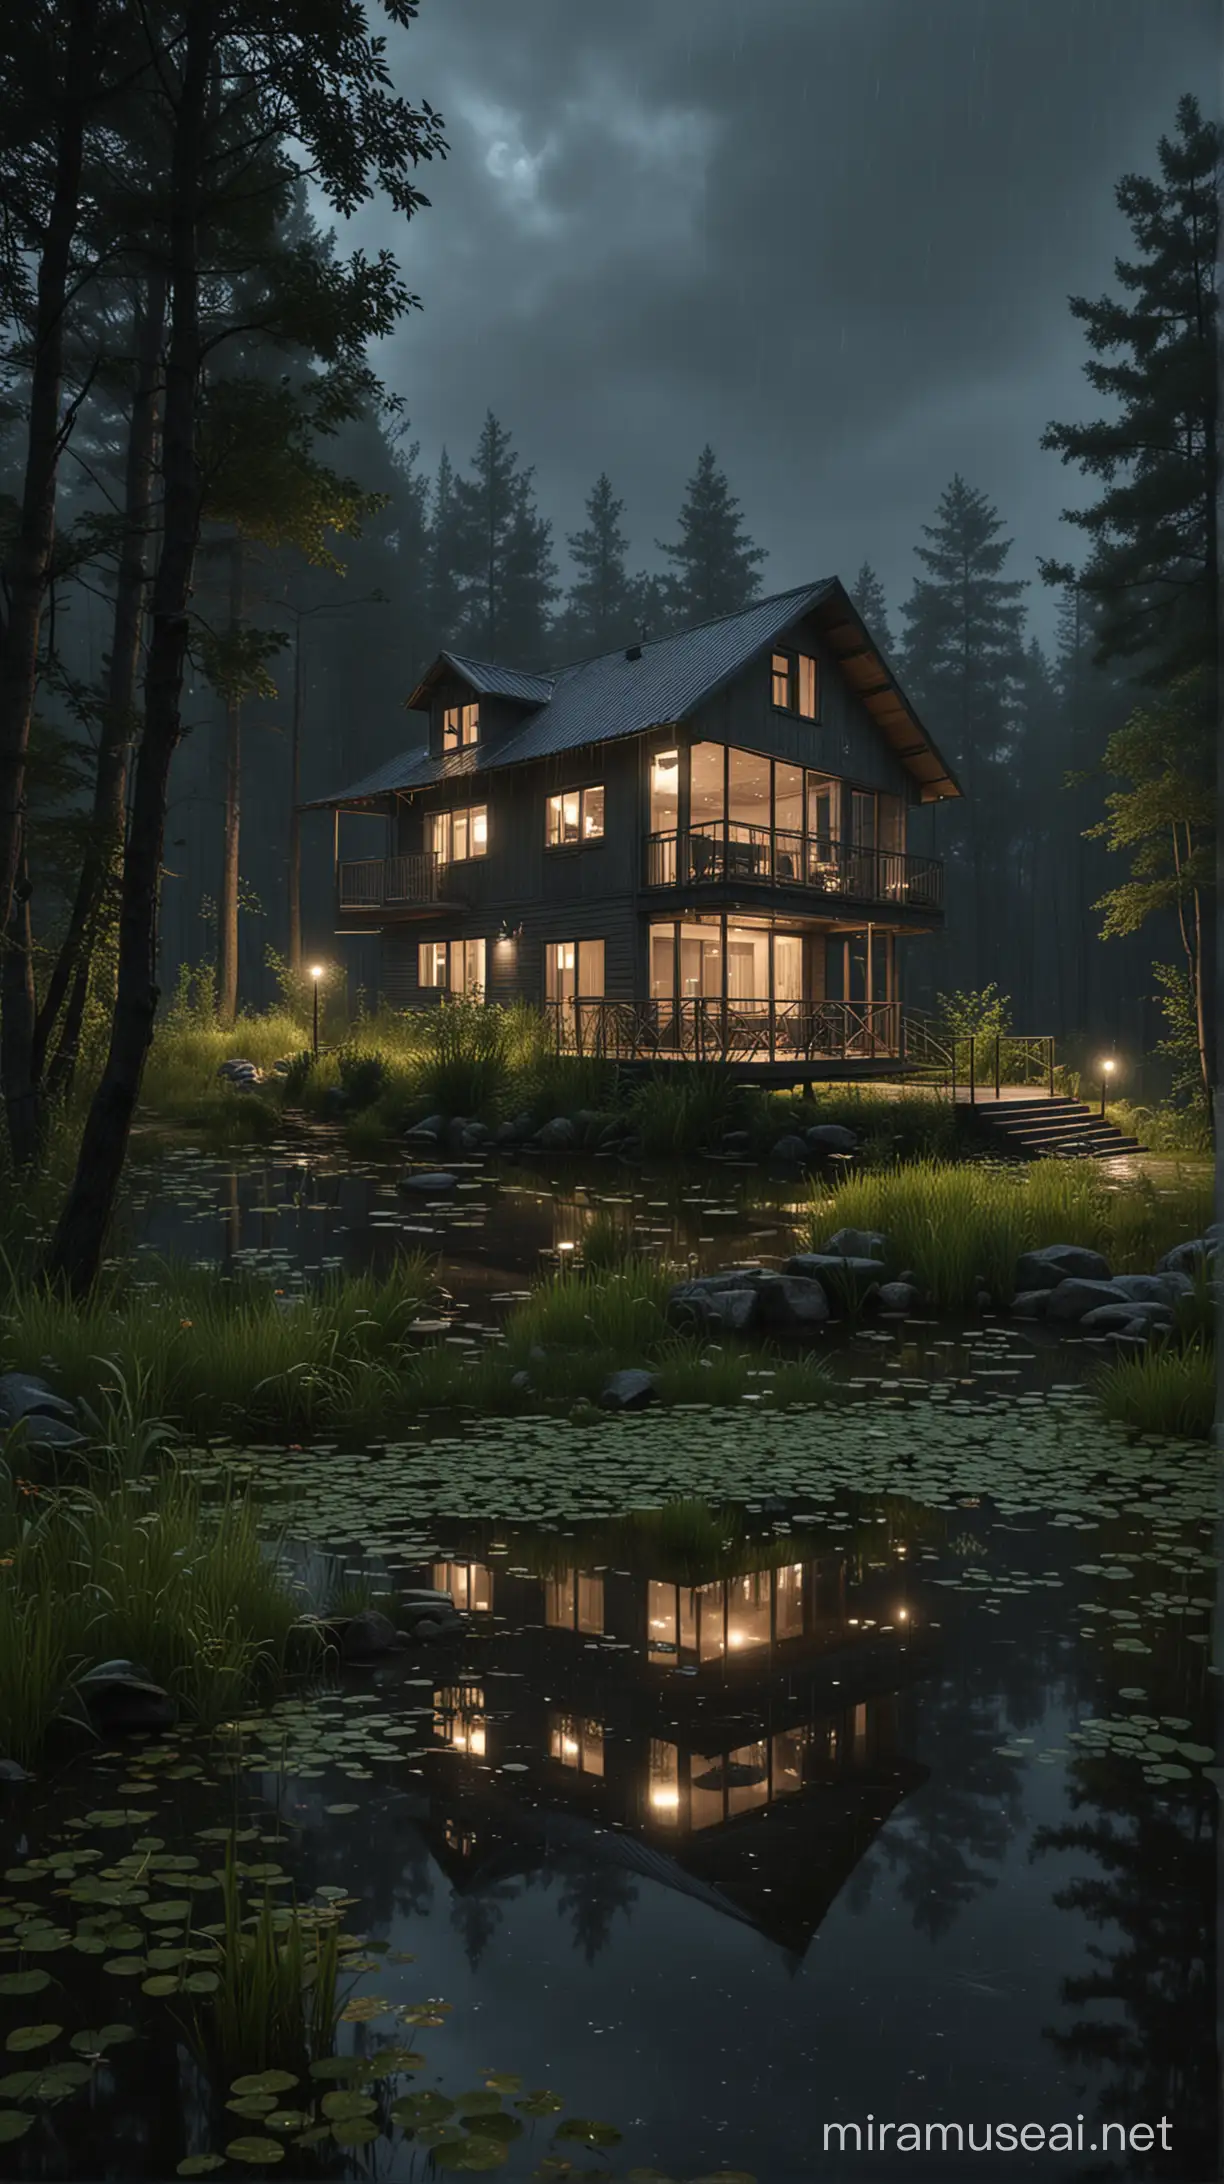 Eerie Rainy Night House by the Forest Pond